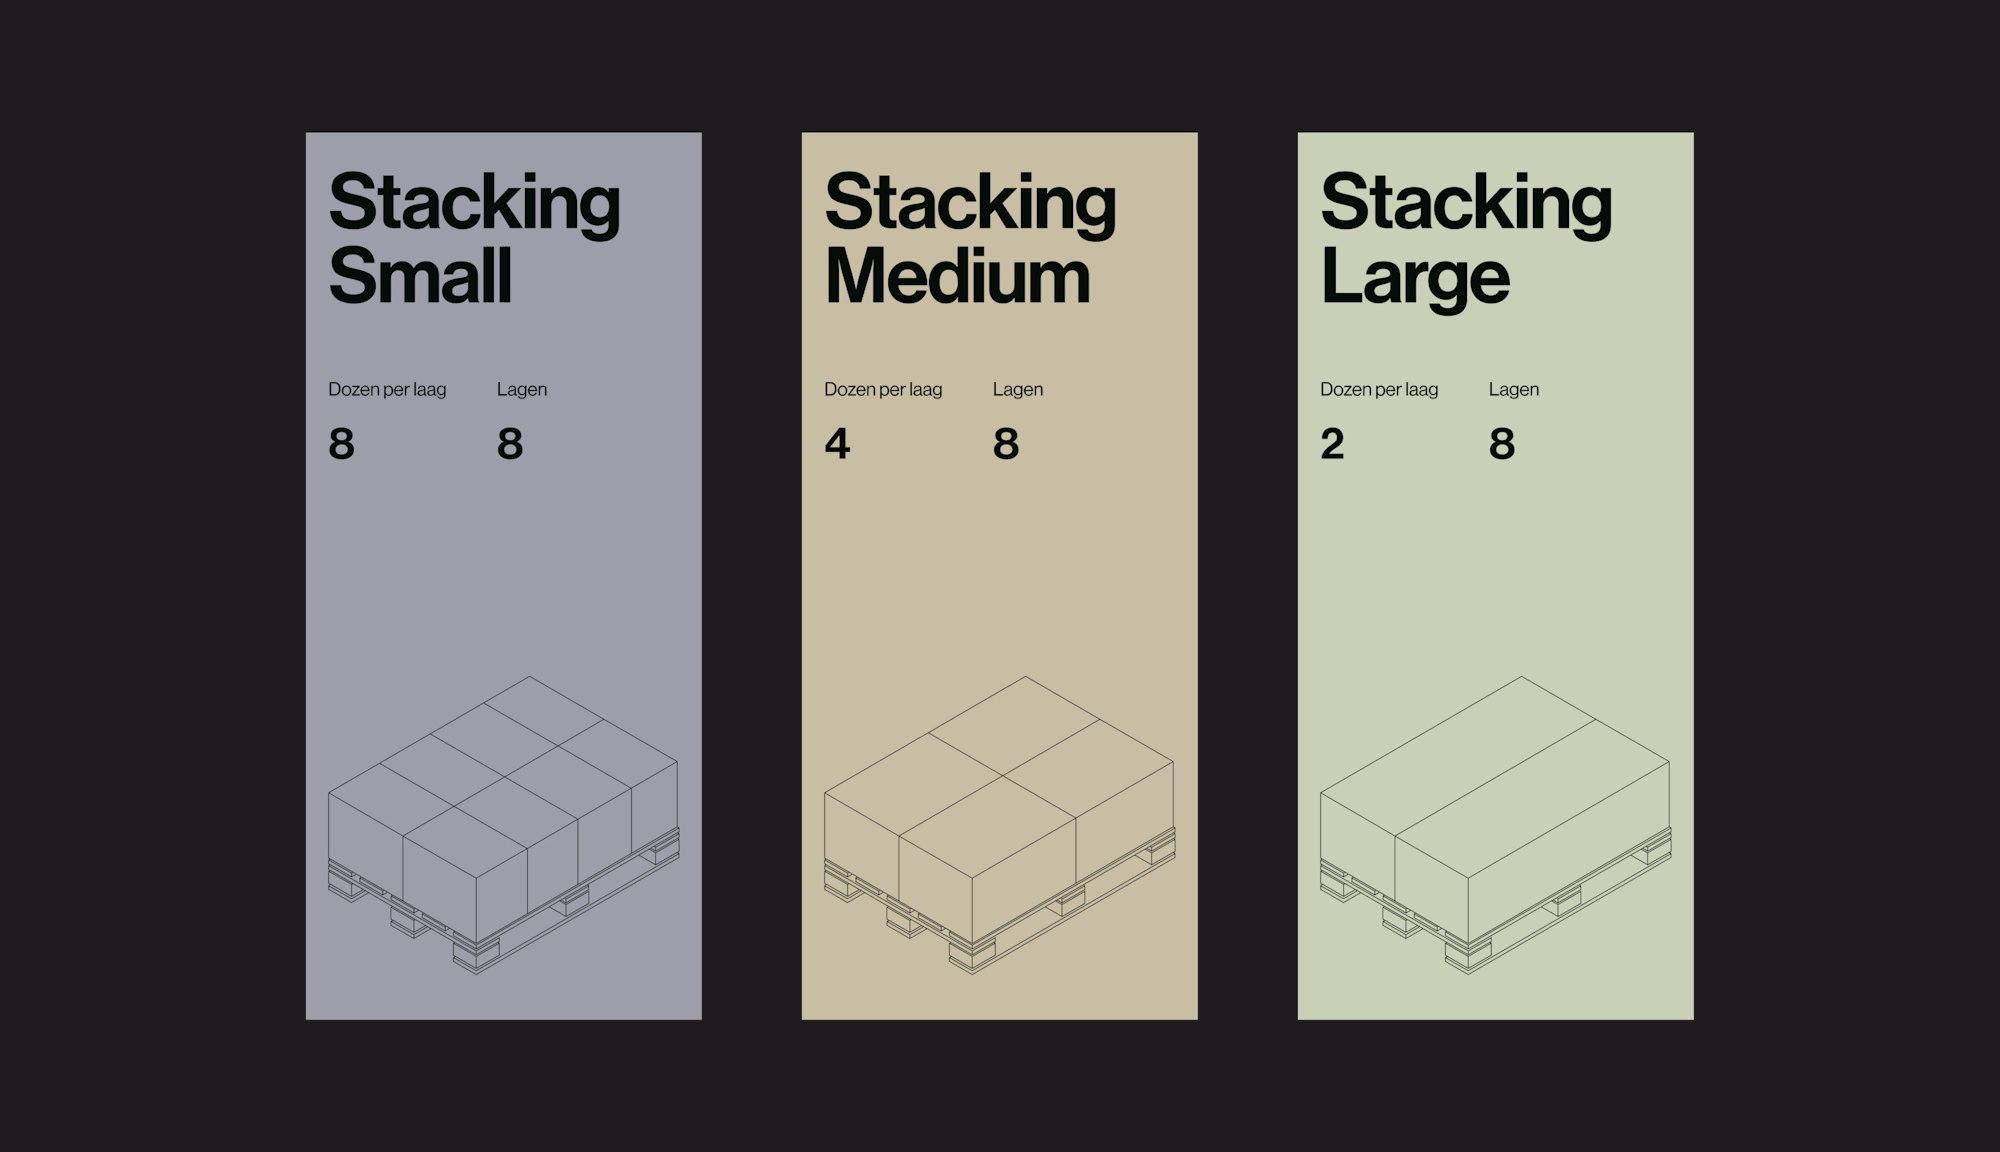 Froster stackings pallets visual